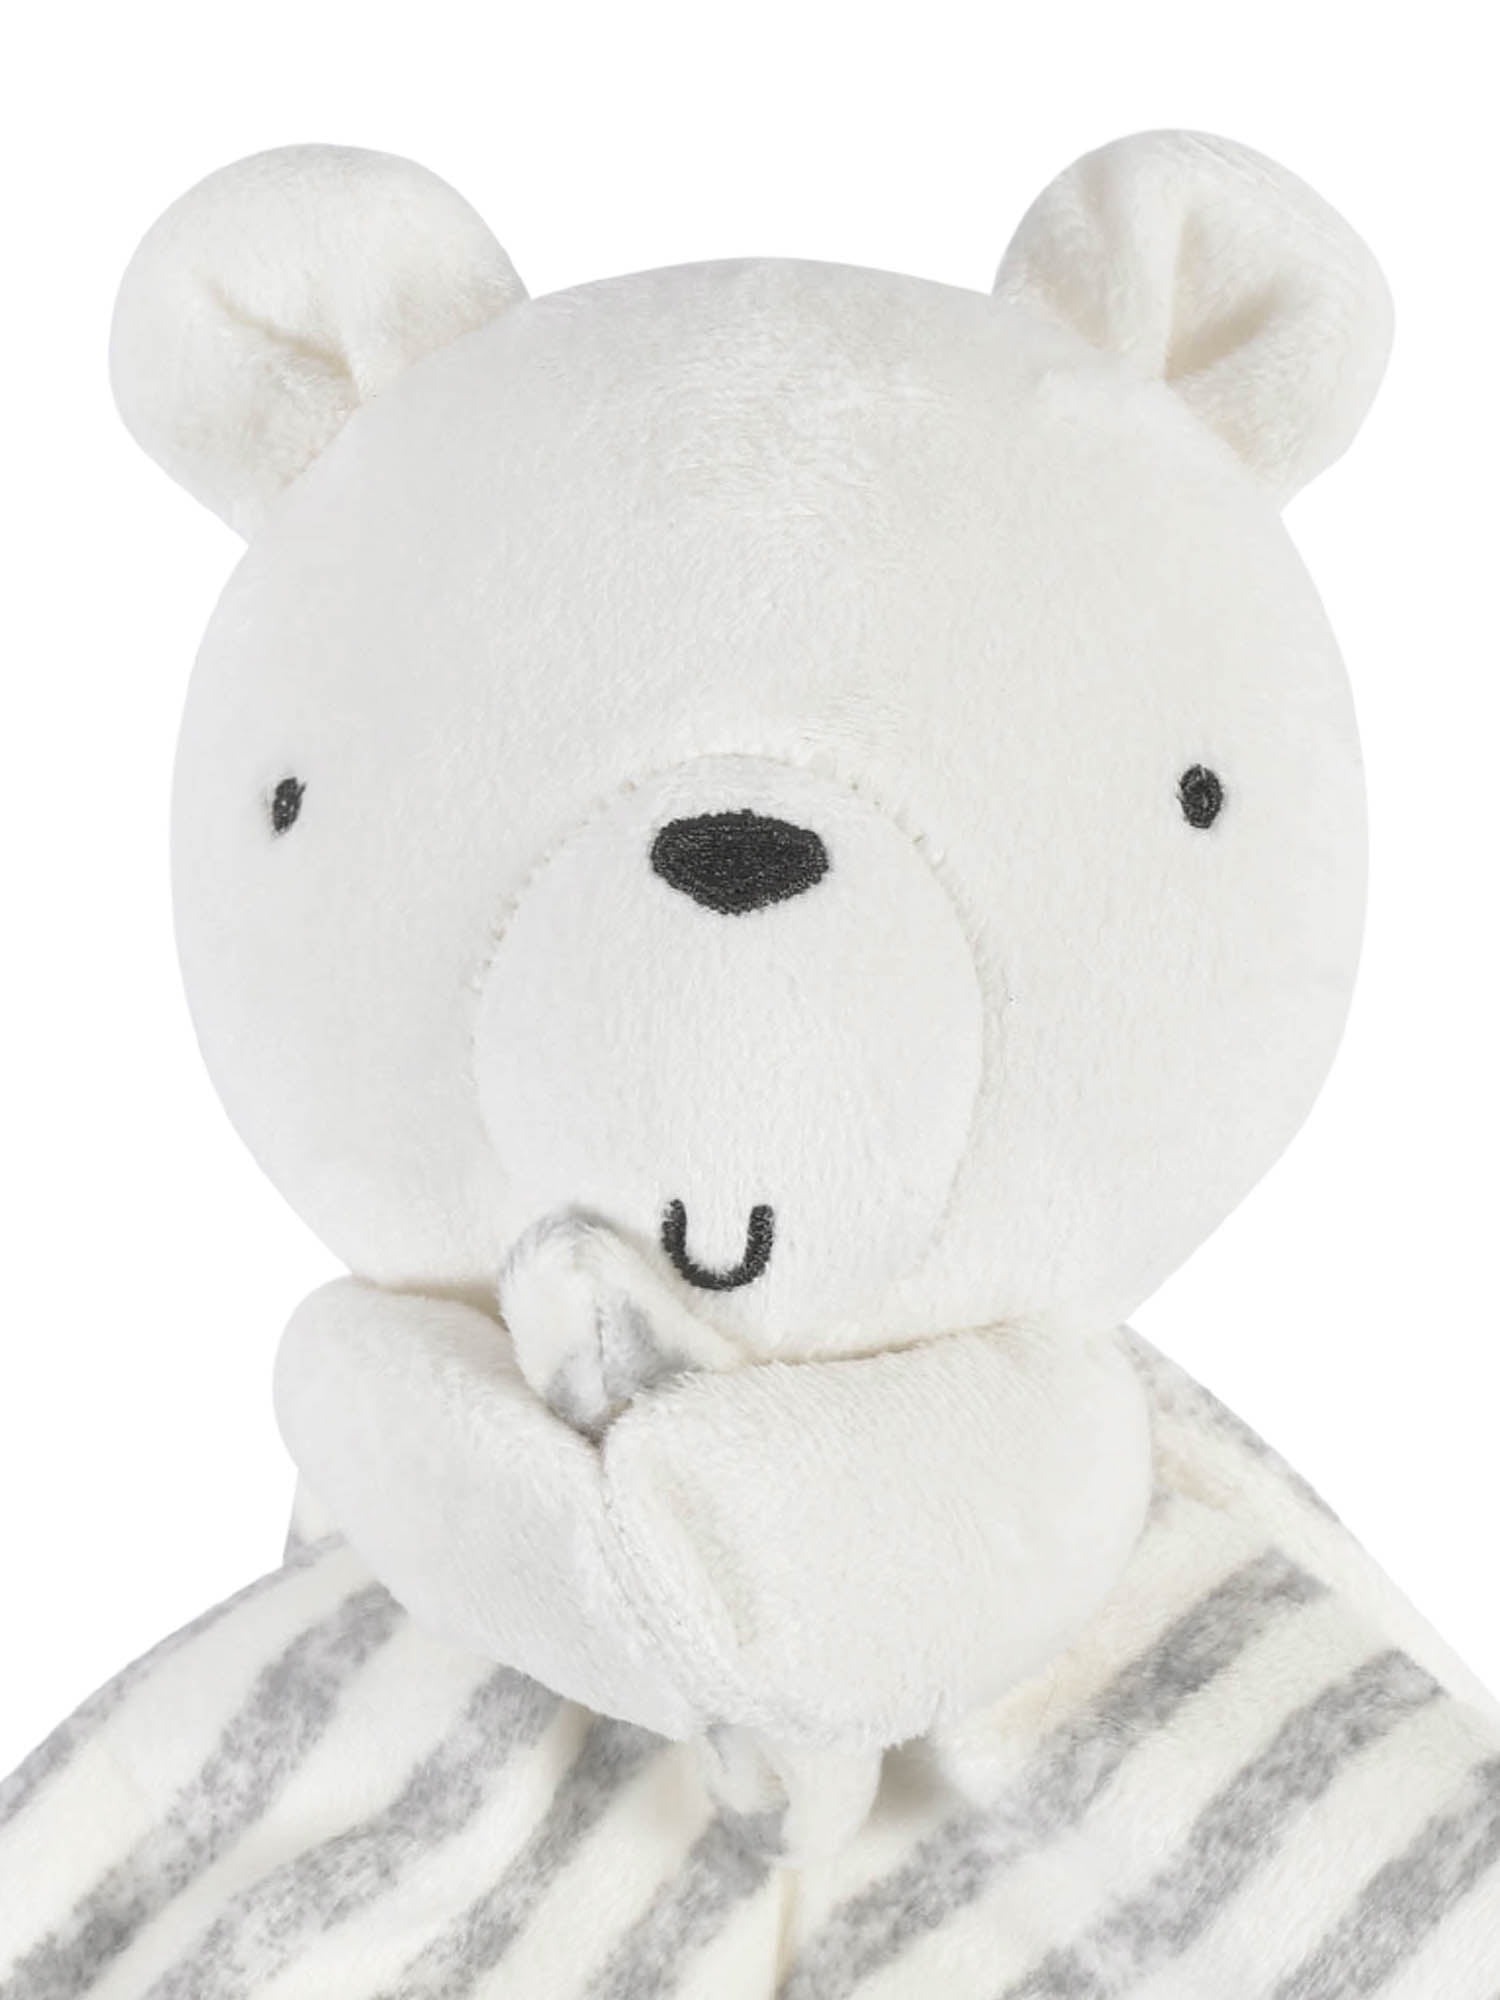 Large Ultra Plush Personalized Teddy Bear Baby Blanket With Moon